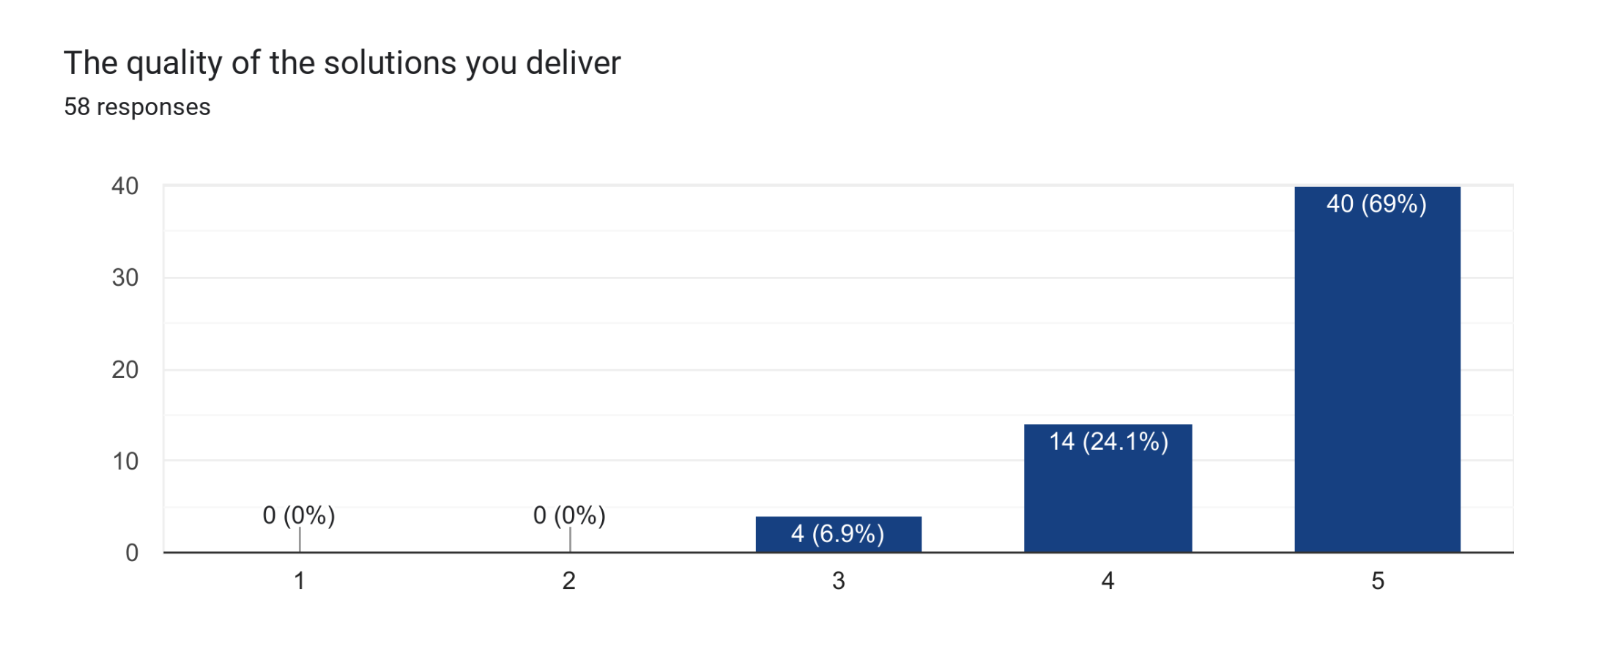 Bar graph titled “The quality of the solutions you deliver” showing 58 responses on a scale of 1 to 5